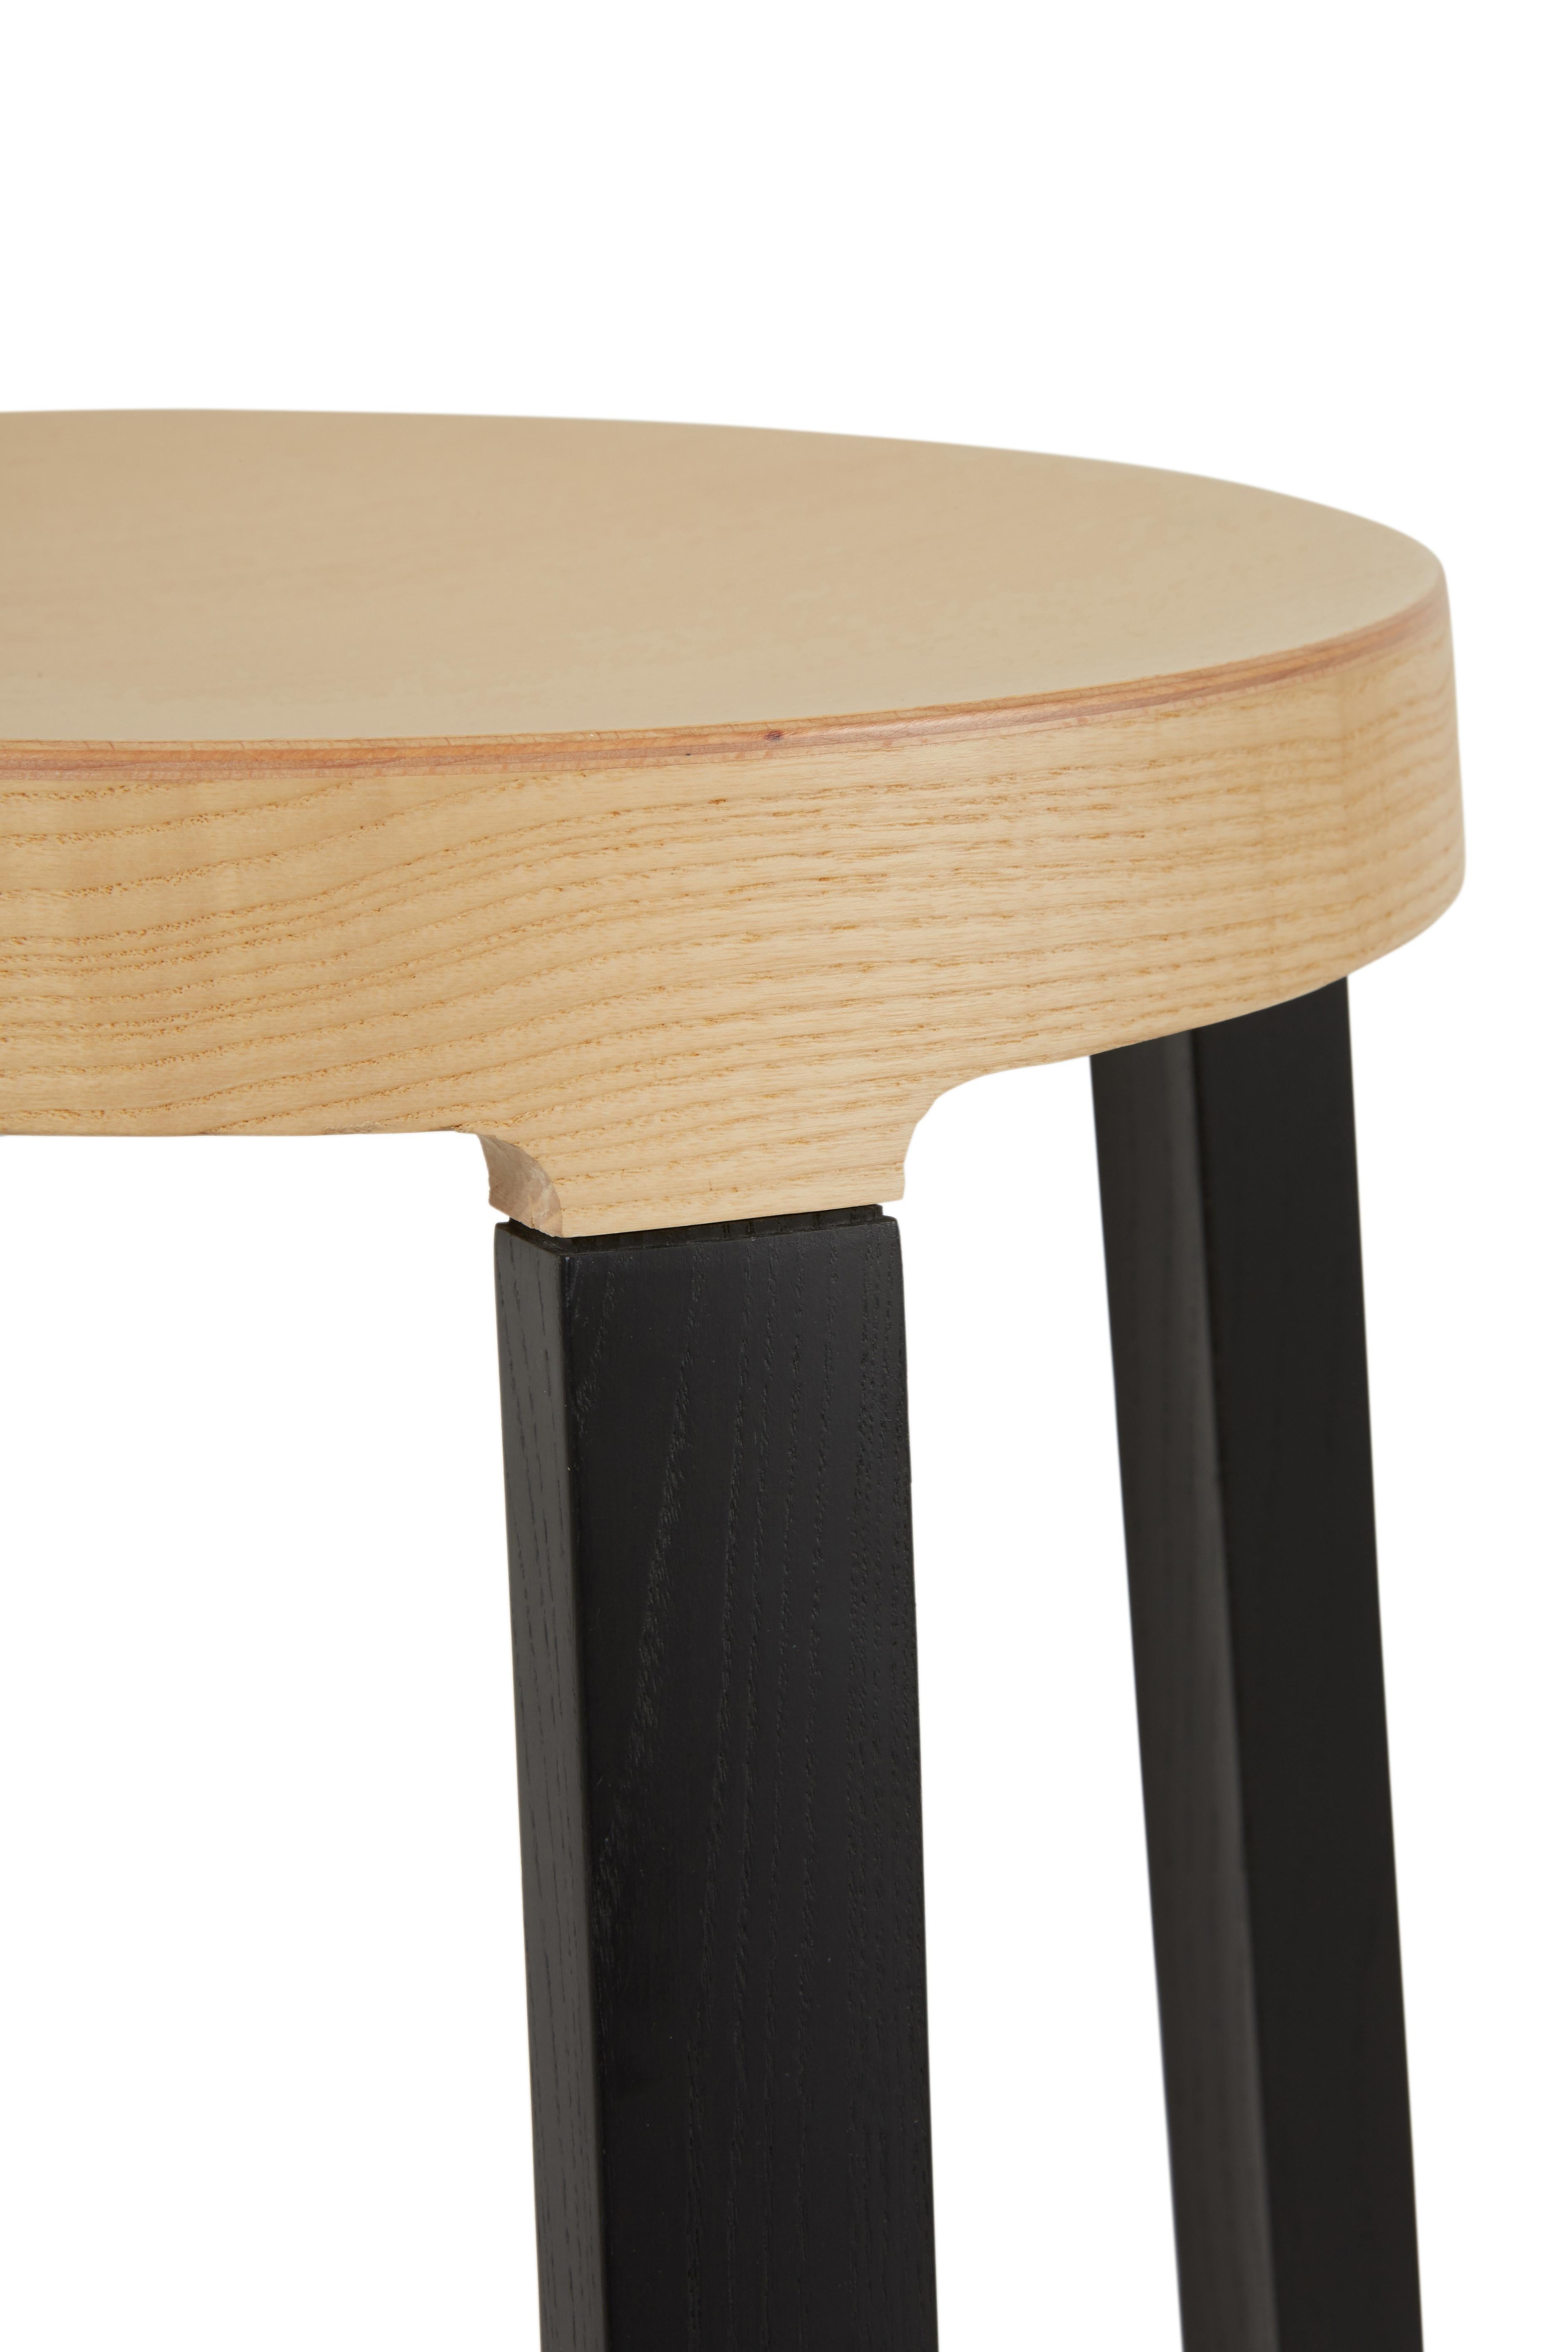 The delightful and charming Step is a solid ash stool made with a high-tech process. This reliable little stool has a strong typology and colorful character that will suit modern, light-filled kitchens, bars and studios.

Also available in short